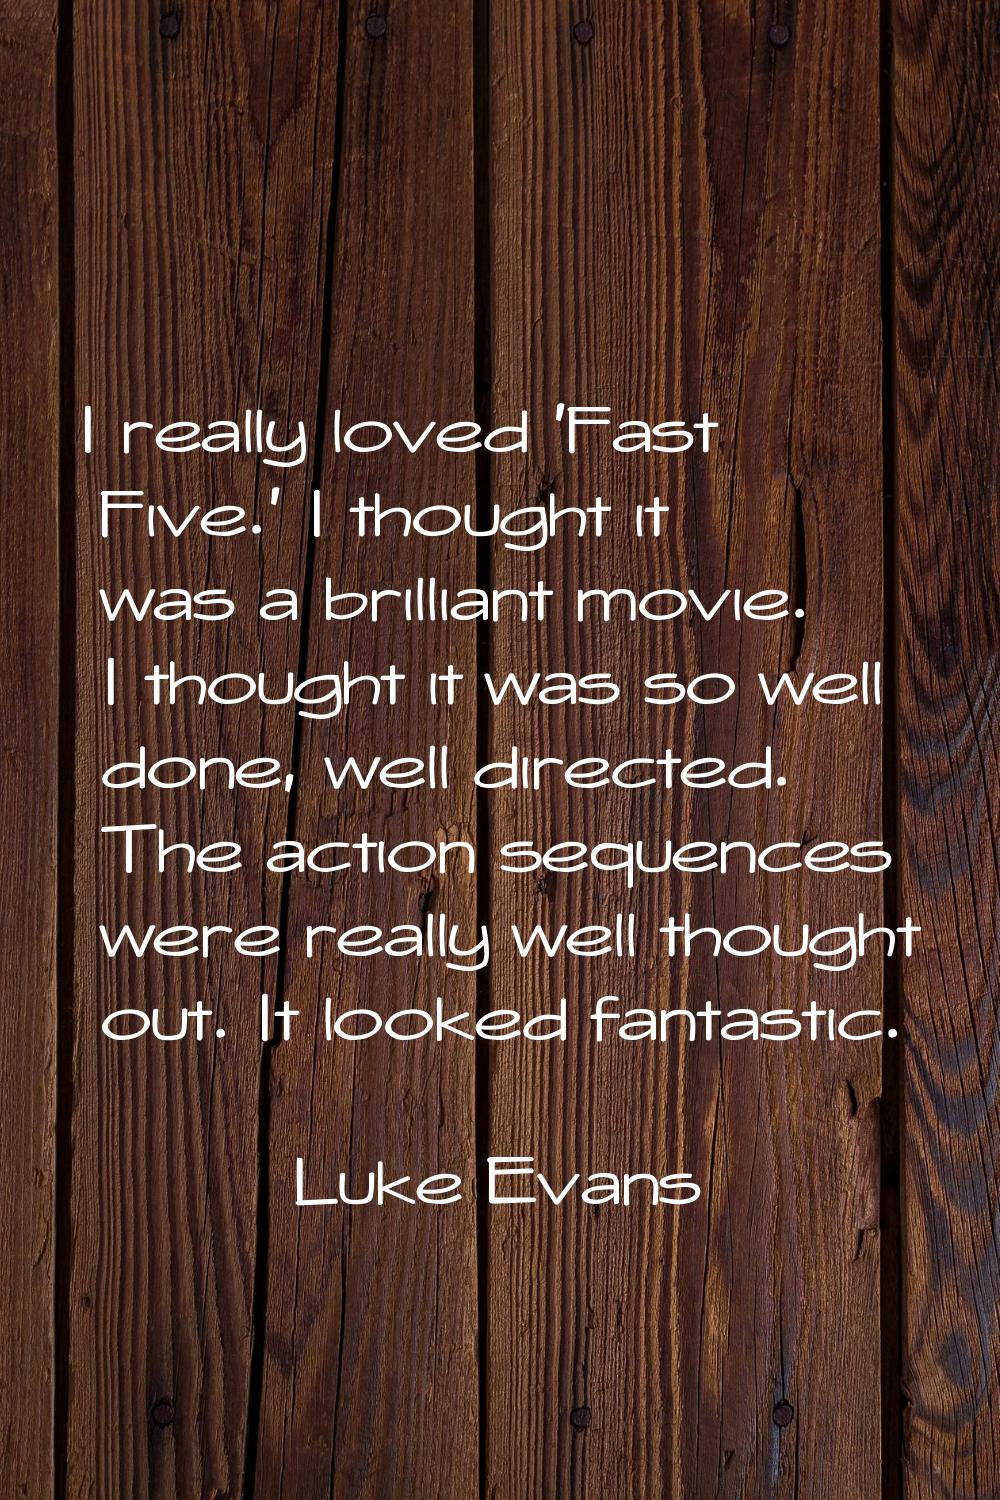 I really loved 'Fast Five.' I thought it was a brilliant movie. I thought it was so well done, well